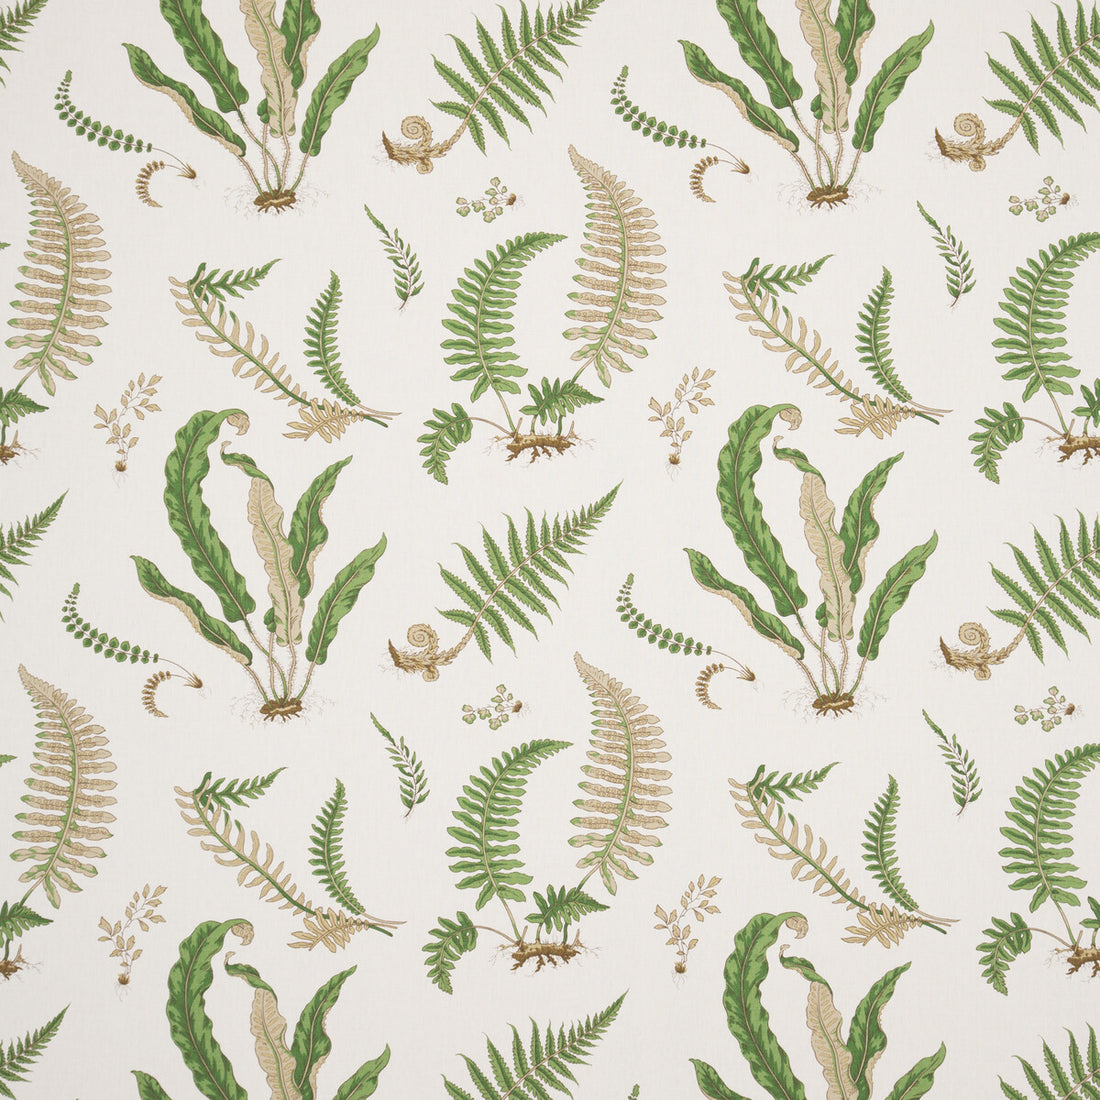 Ferns Linen fabric in stone/green color - pattern R1324.1.0 - by G P &amp; J Baker in the Perennia collection